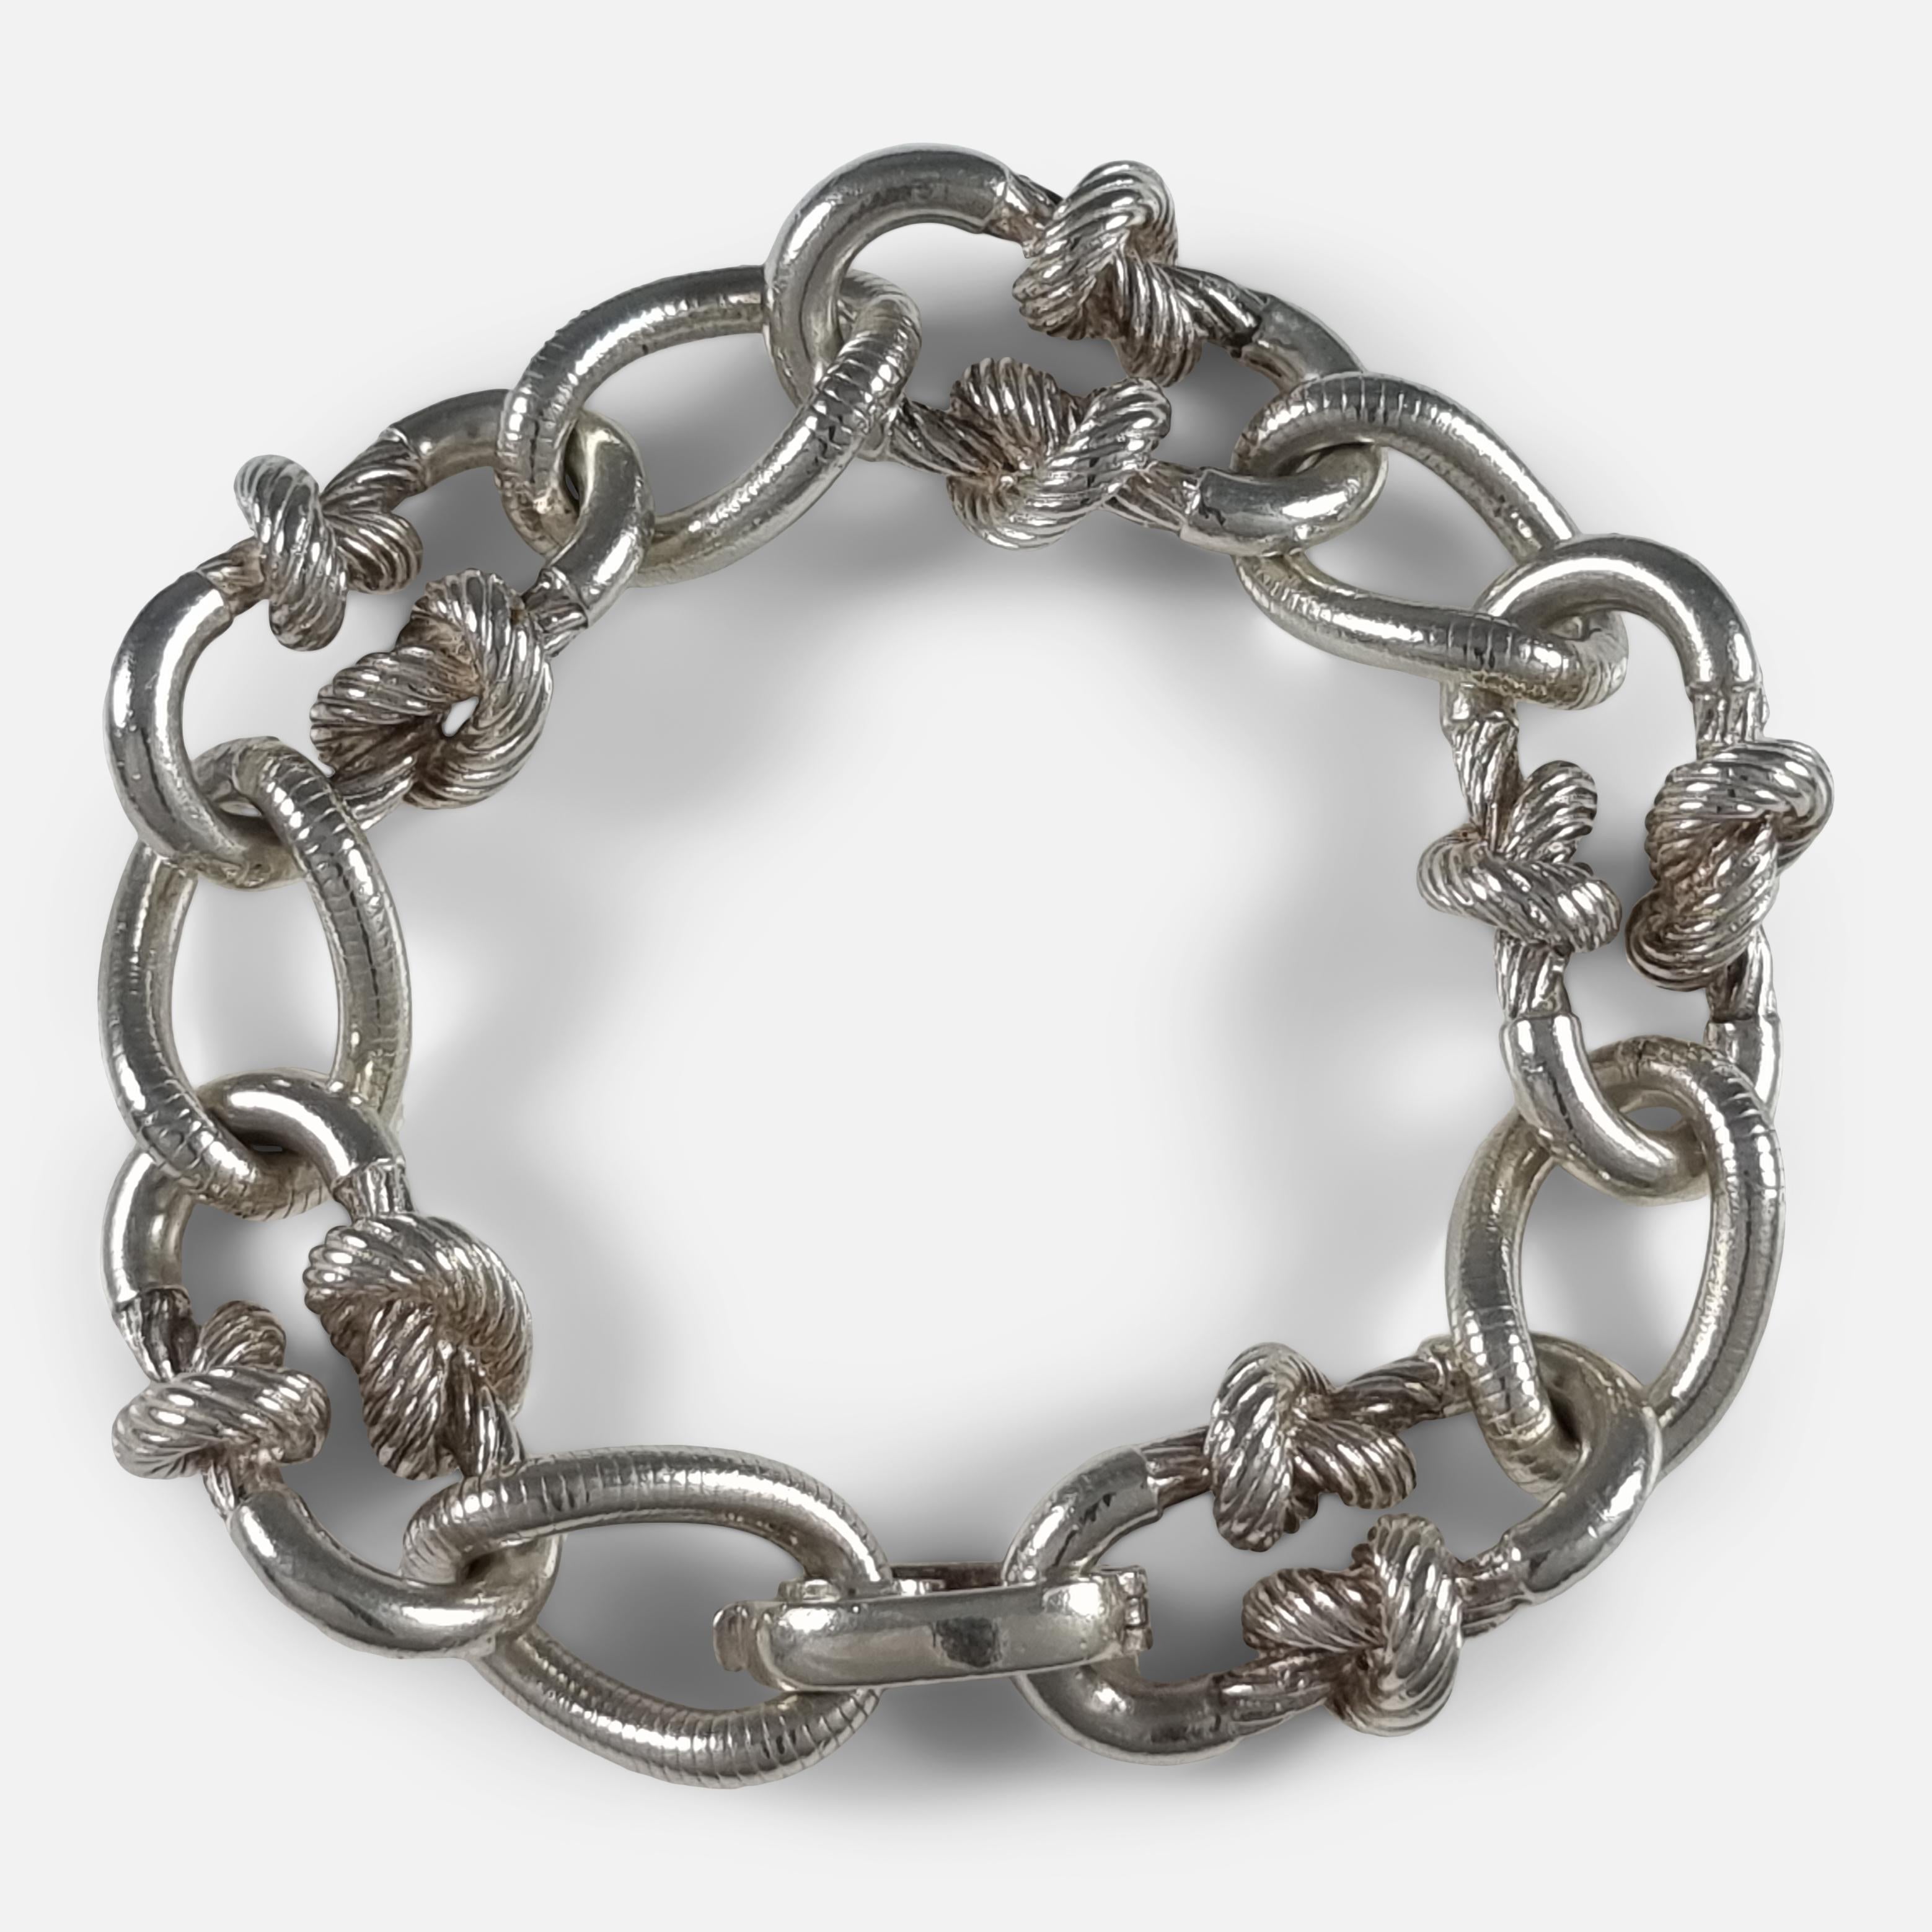 A German sterling silver knot link bracelet, by Grossé.

The bracelet is stamped with the makers mark 'Grosse', 'Germany', '1970', and 'S925'.

Stamped with London import marks, 1971.

Assay: - .925 (Sterling silver).

Period: - Late 20th